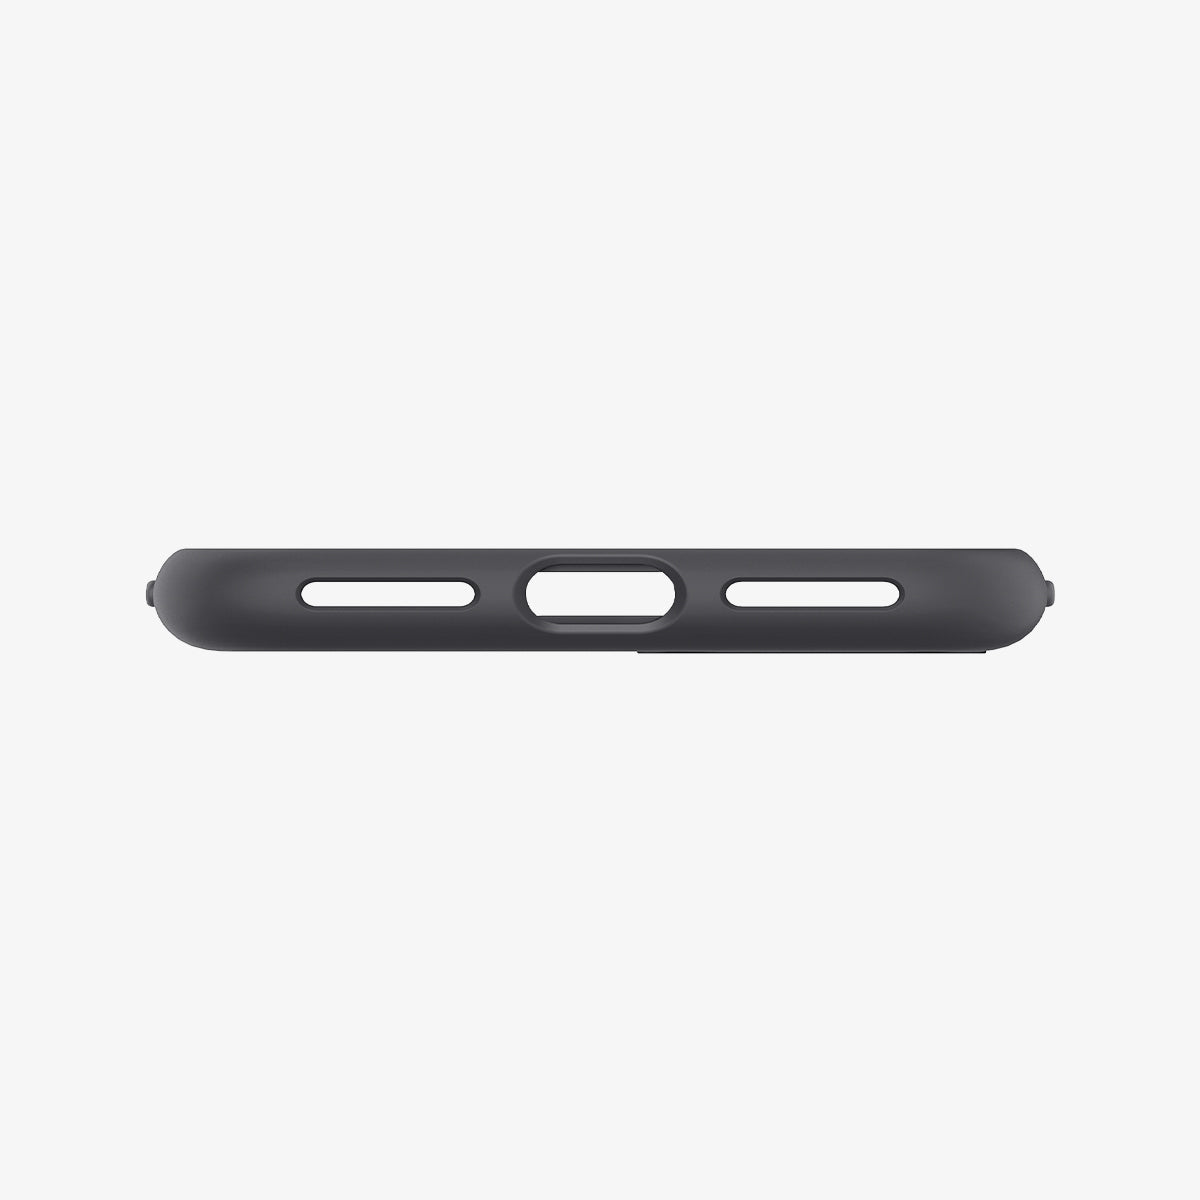 ACS04349 - iPhone SE Silicone Fit case in black showing the bottom